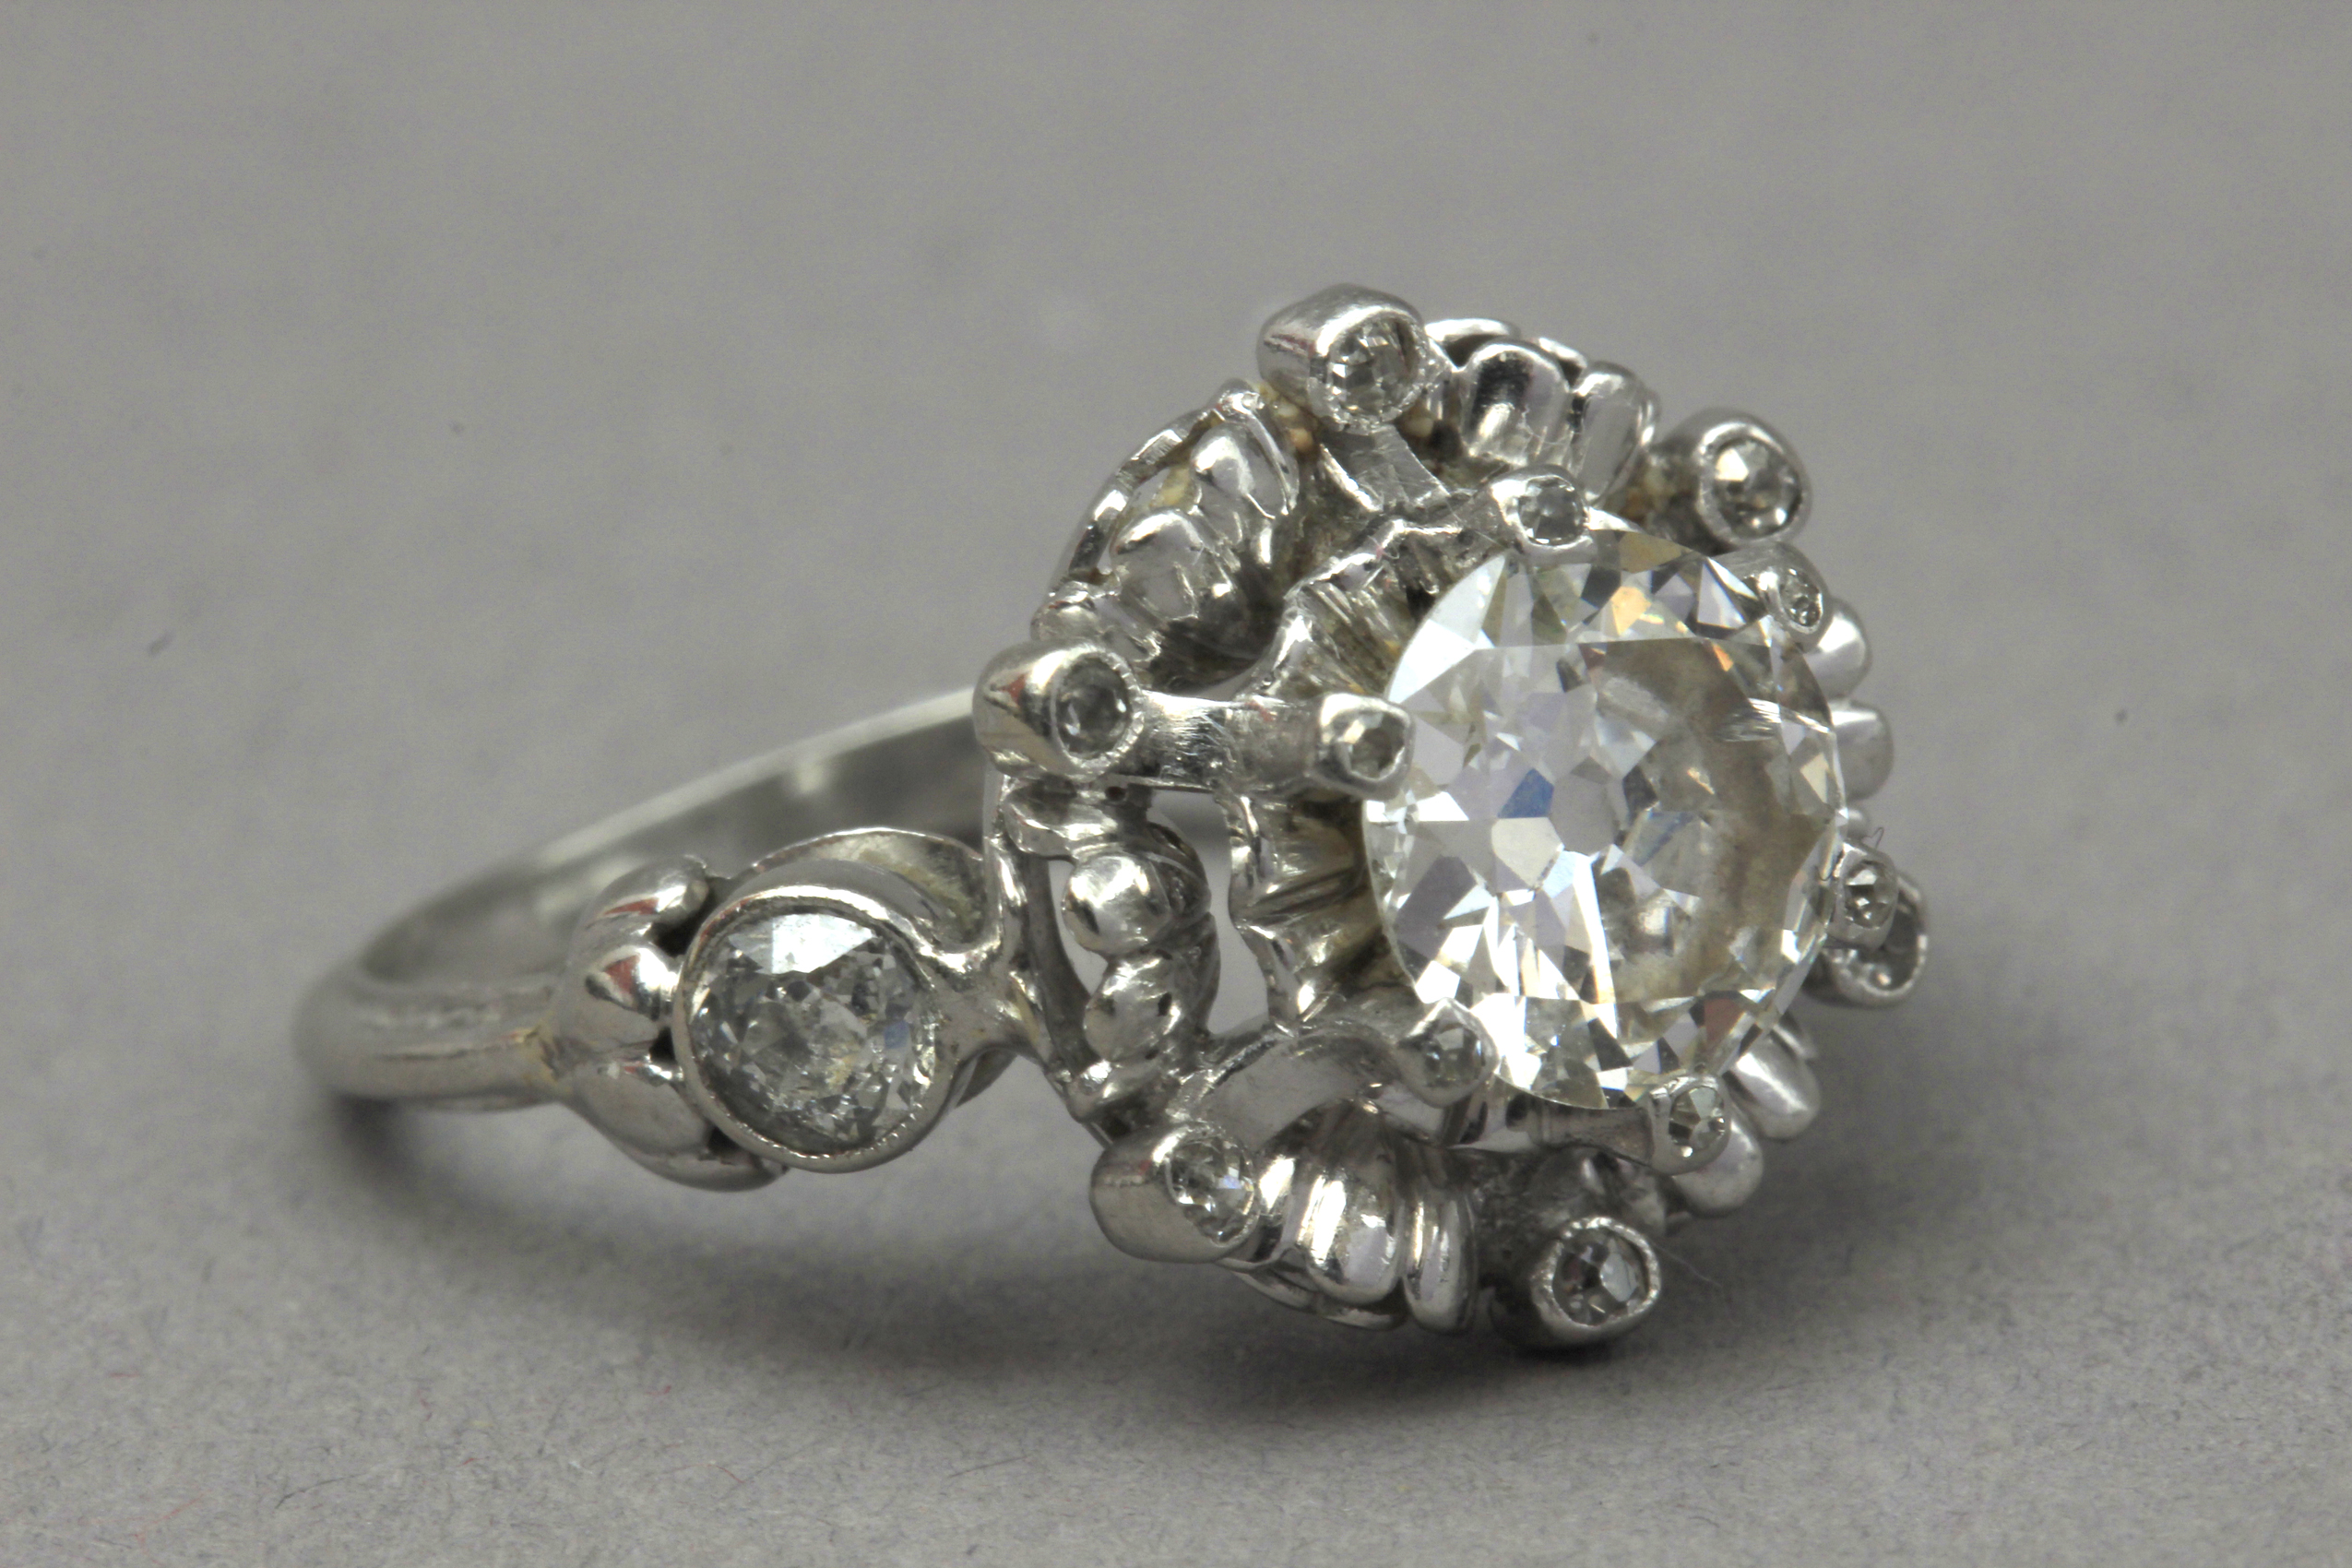 A first half of 20th century 1,75 ct. aprox. Old European cut diamond solitaire ring